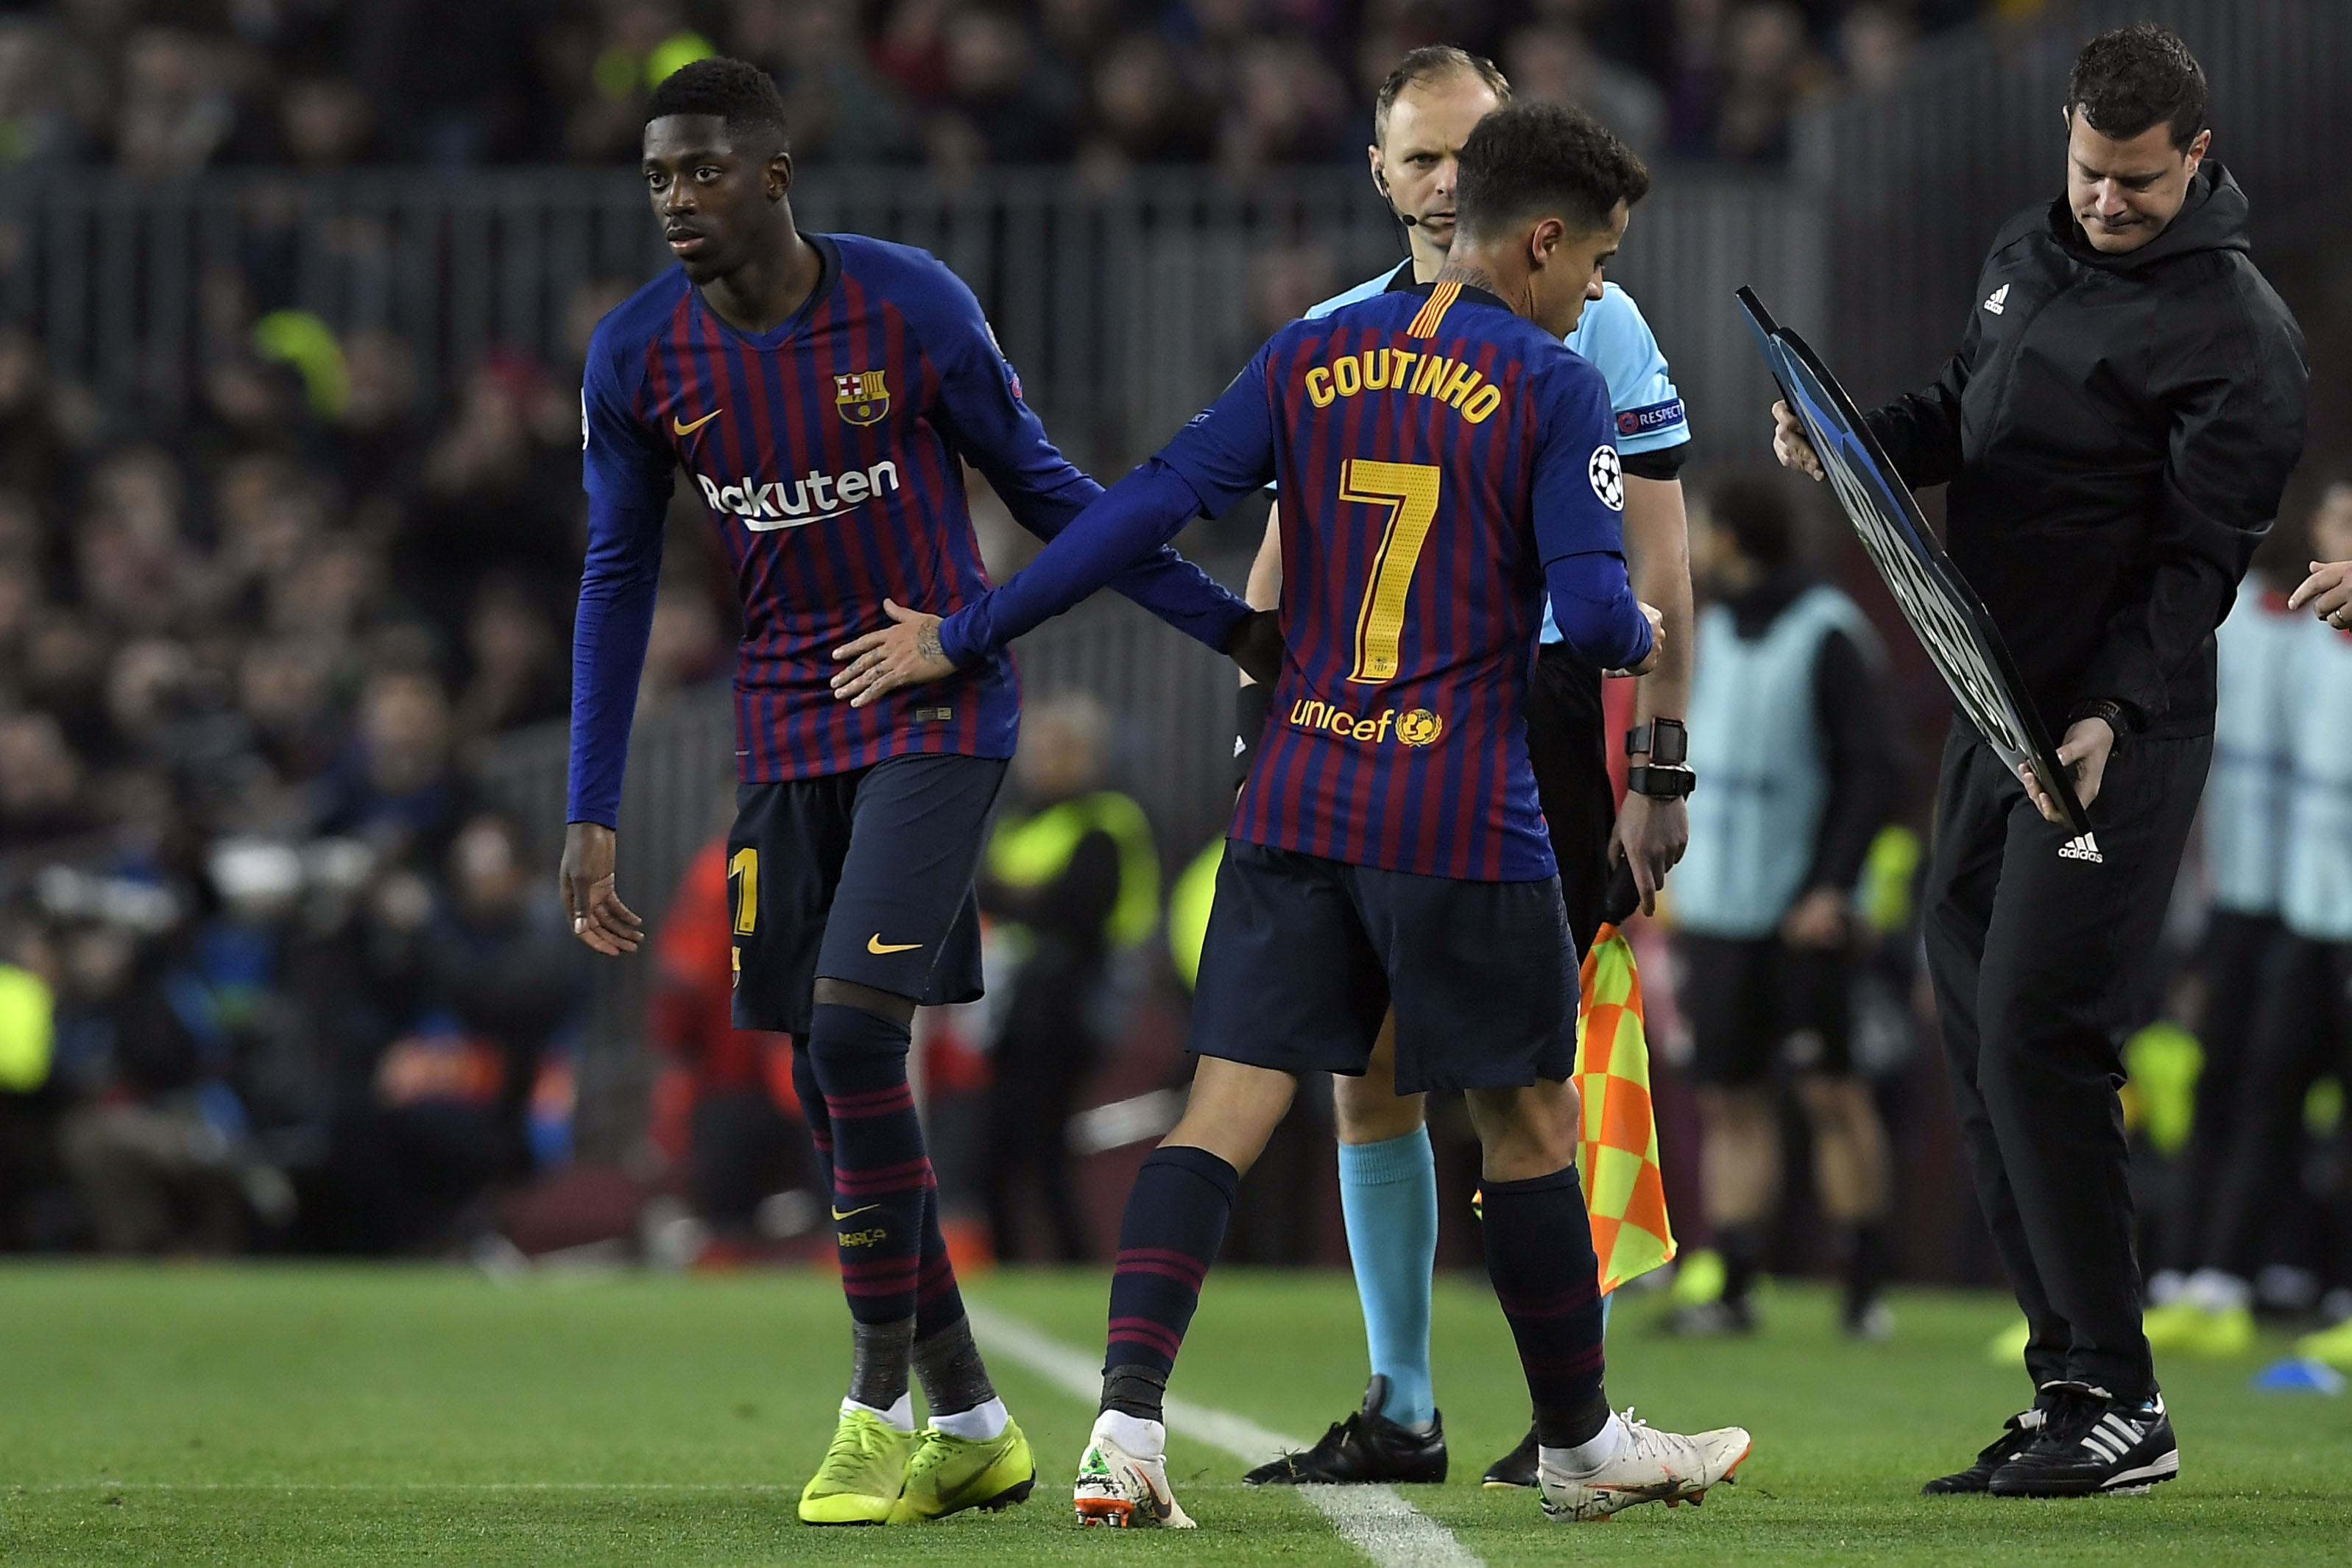 Barcelona's Brazilian midfielder Philippe Coutinho (C) greets Barcelona's French forward Ousmane Dembele (L) as he leaves the pitch during the UEFA Champions League round of 16, second leg football match between FC Barcelona and Olympique Lyonnais at the Camp Nou stadium in Barcelona on March 13, 2019. (Photo by LLUIS GENE / AFP)        (Photo credit should read LLUIS GENE/AFP/Getty Images)